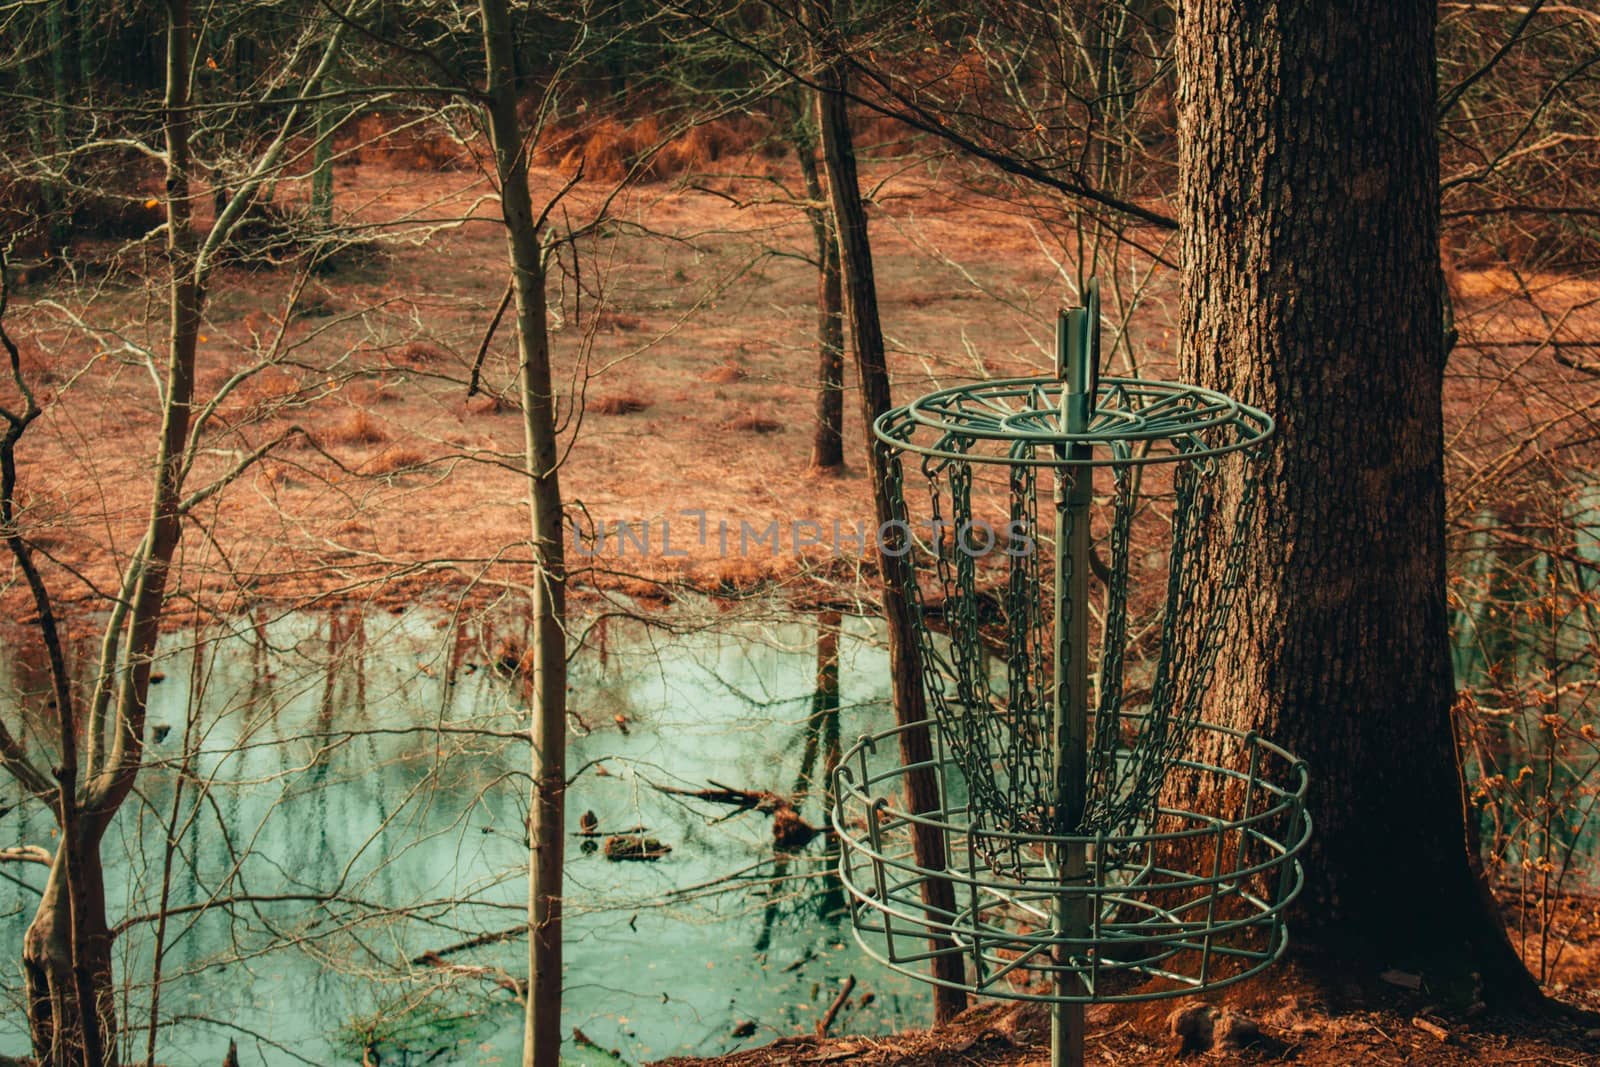 A Chain Frisbee Golf Hole in a Dead Winter Forest With a Pond Behind It